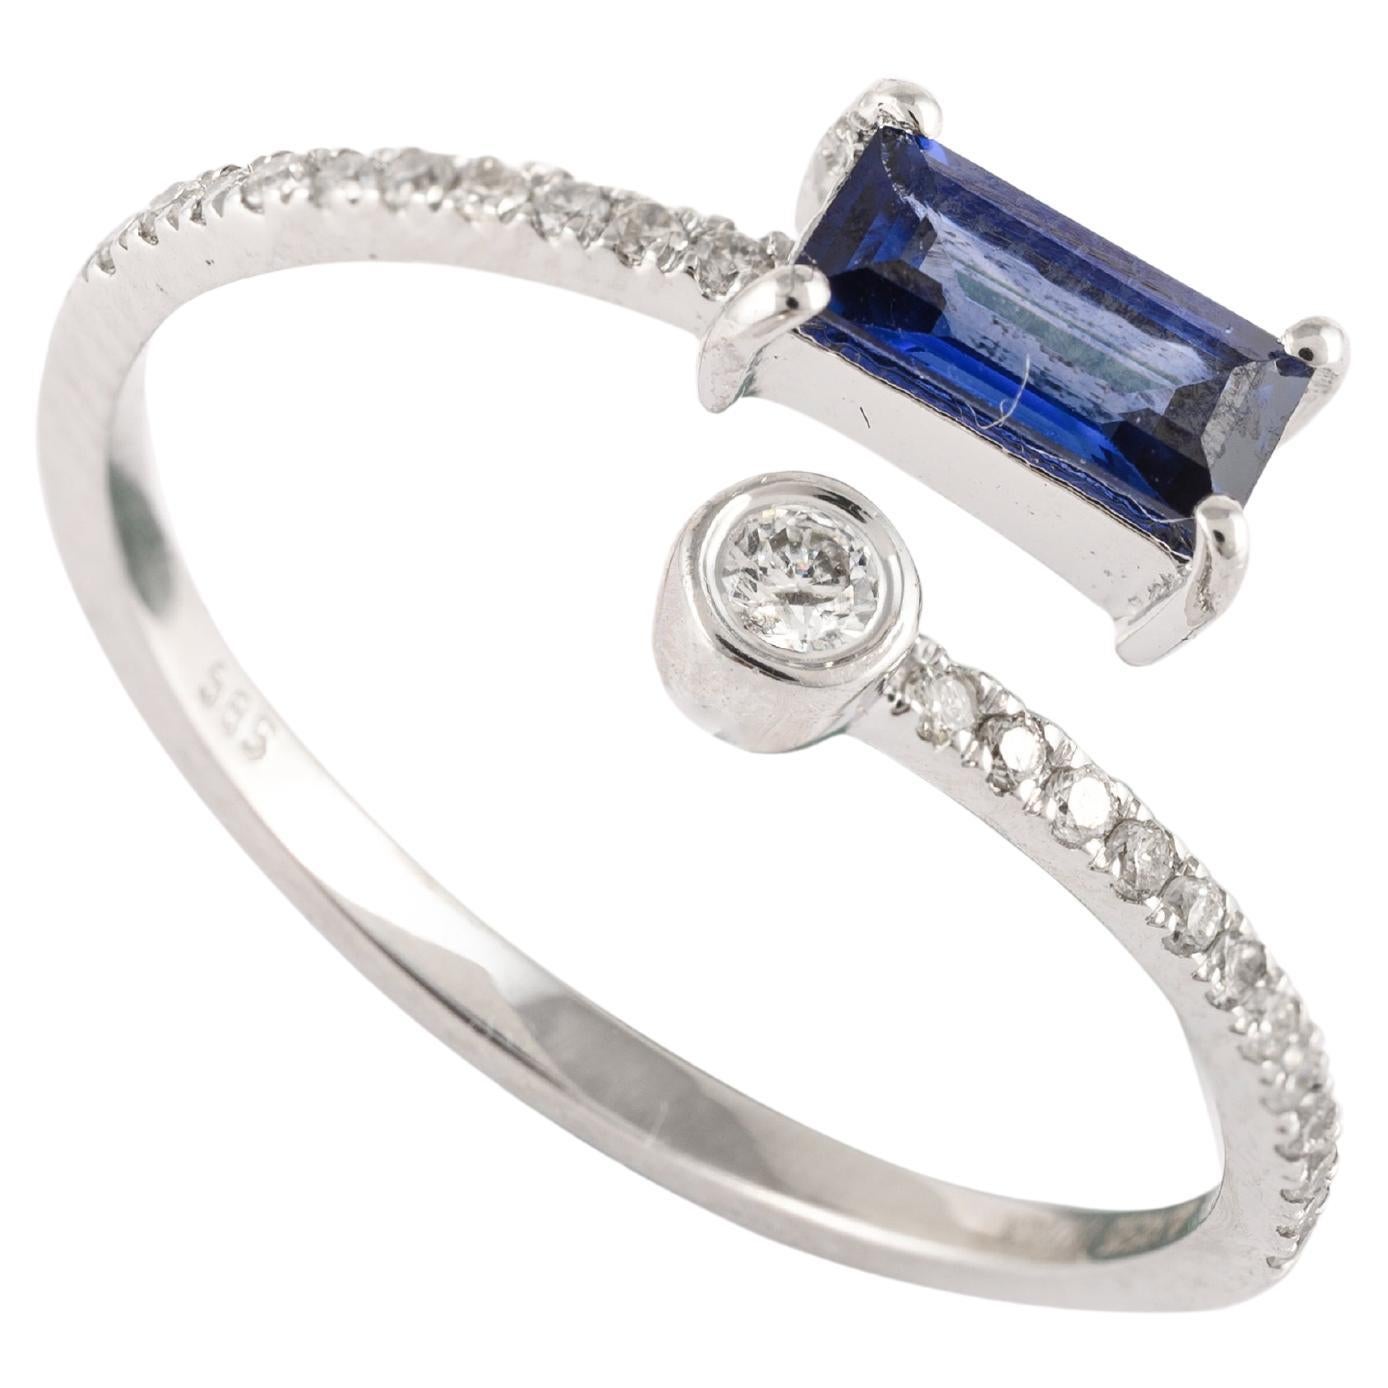 For Sale:  14k Solid White Gold Minimalist Open Ring with Blue Sapphire and Diamonds